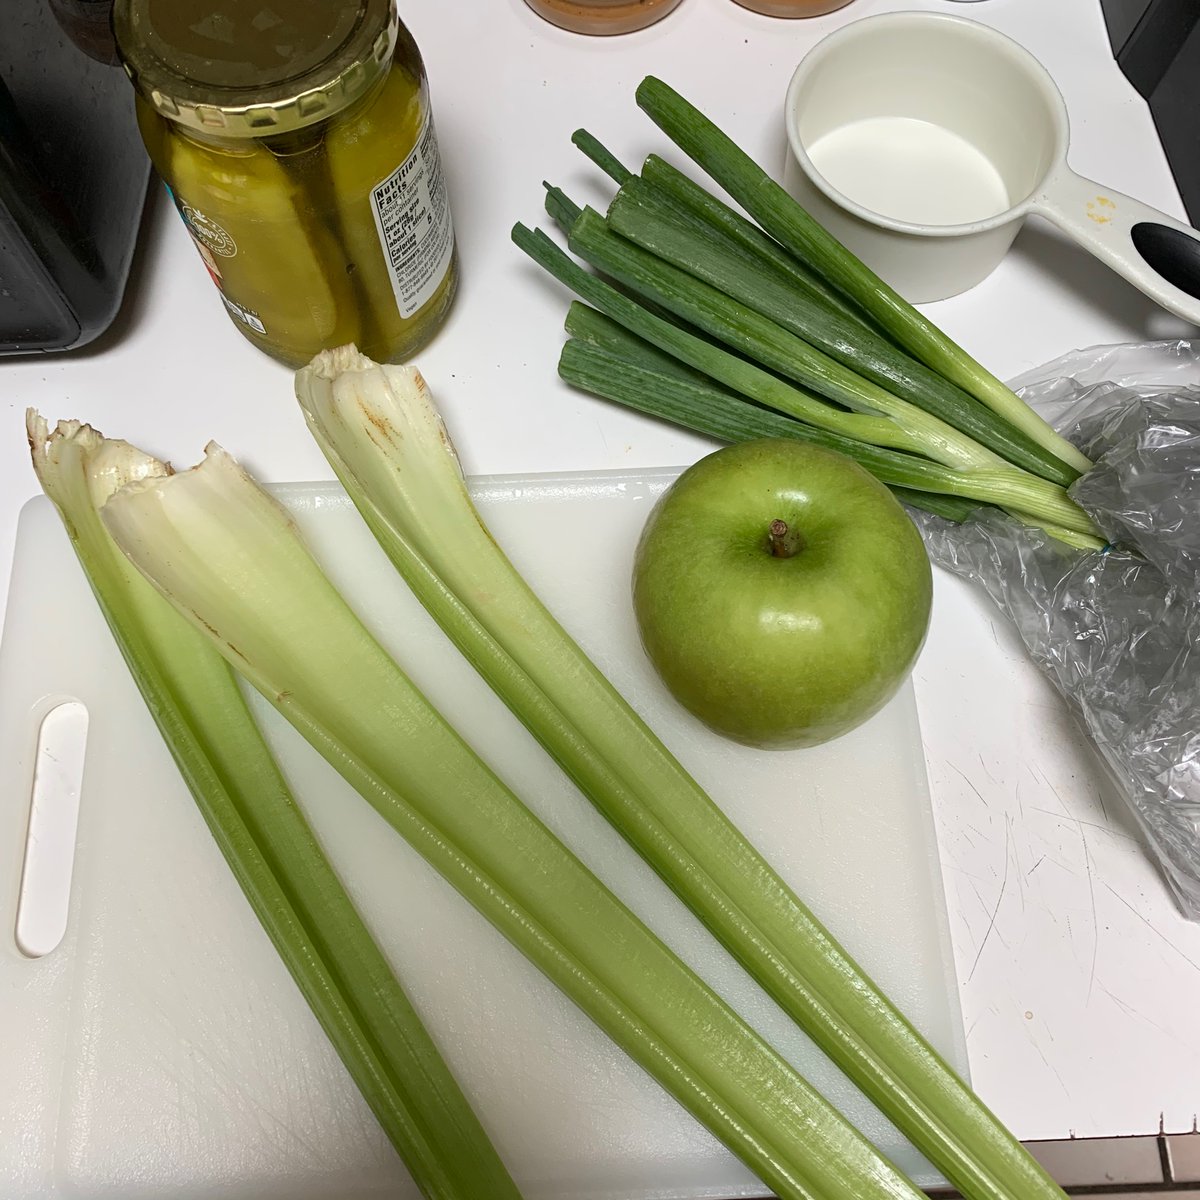 3 stalks of celery, one granny smith, a cup of diced pickles, and the surprise for my wife - scallions. I'm going to make two batches this year. She always tells me my potato salad is missing onions, so this year hers won't be. They will be added last though. 26/